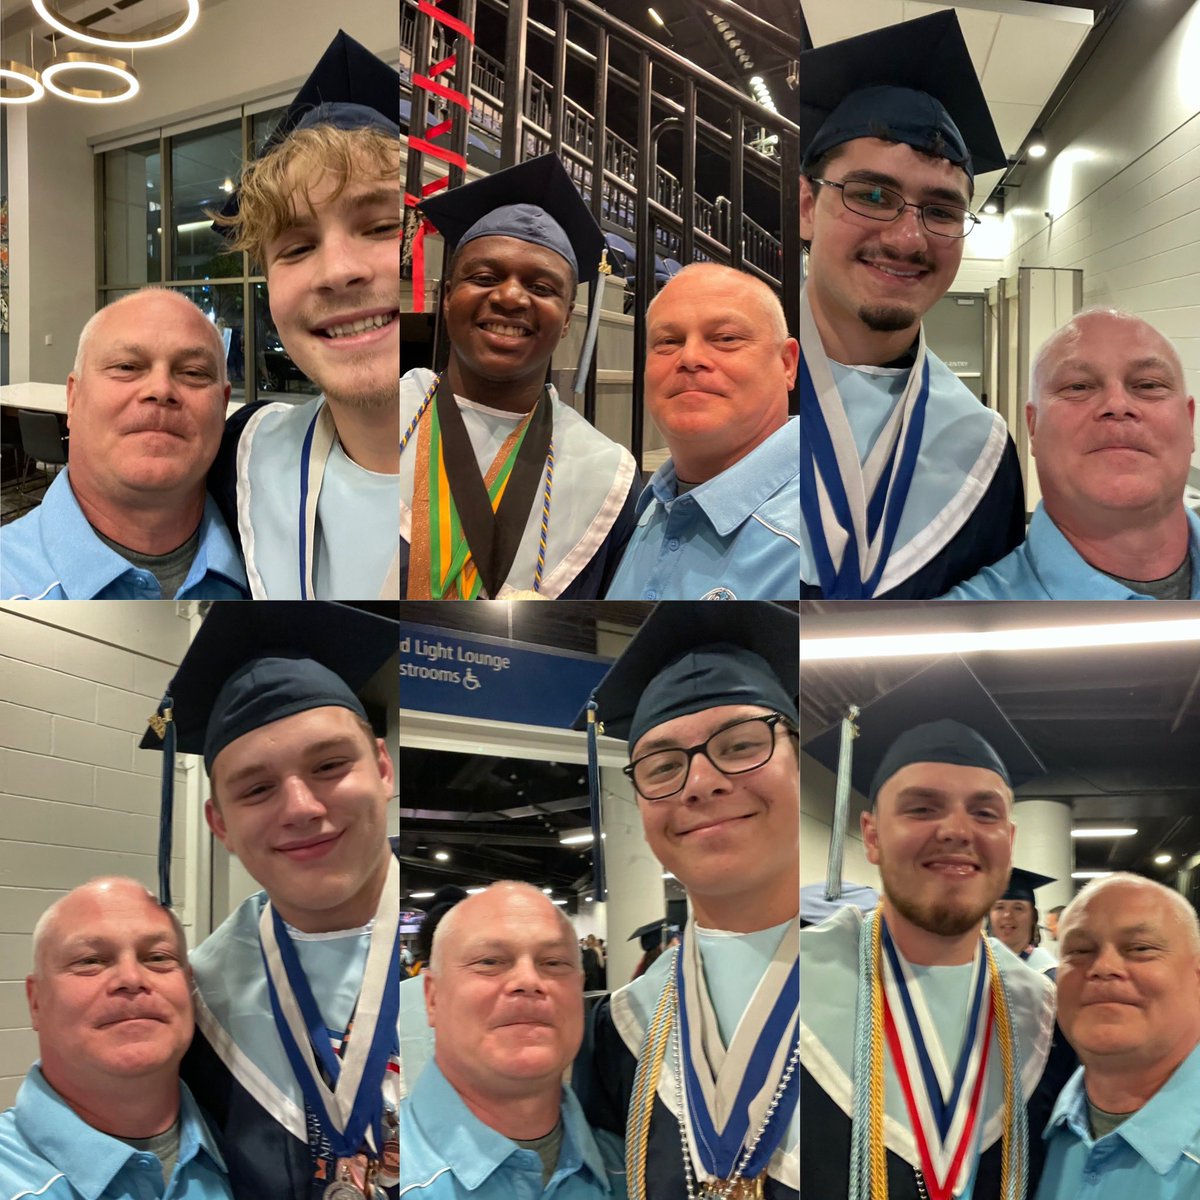 Very proud to see our senior wrestlers walk across the stage last night! Congrats Cade, Colin, Parker, Peyton, Gibril and Bradley!!! 
#bleedblue 💙
#studentathletes  🎓
#wrestlingfamily  🤼